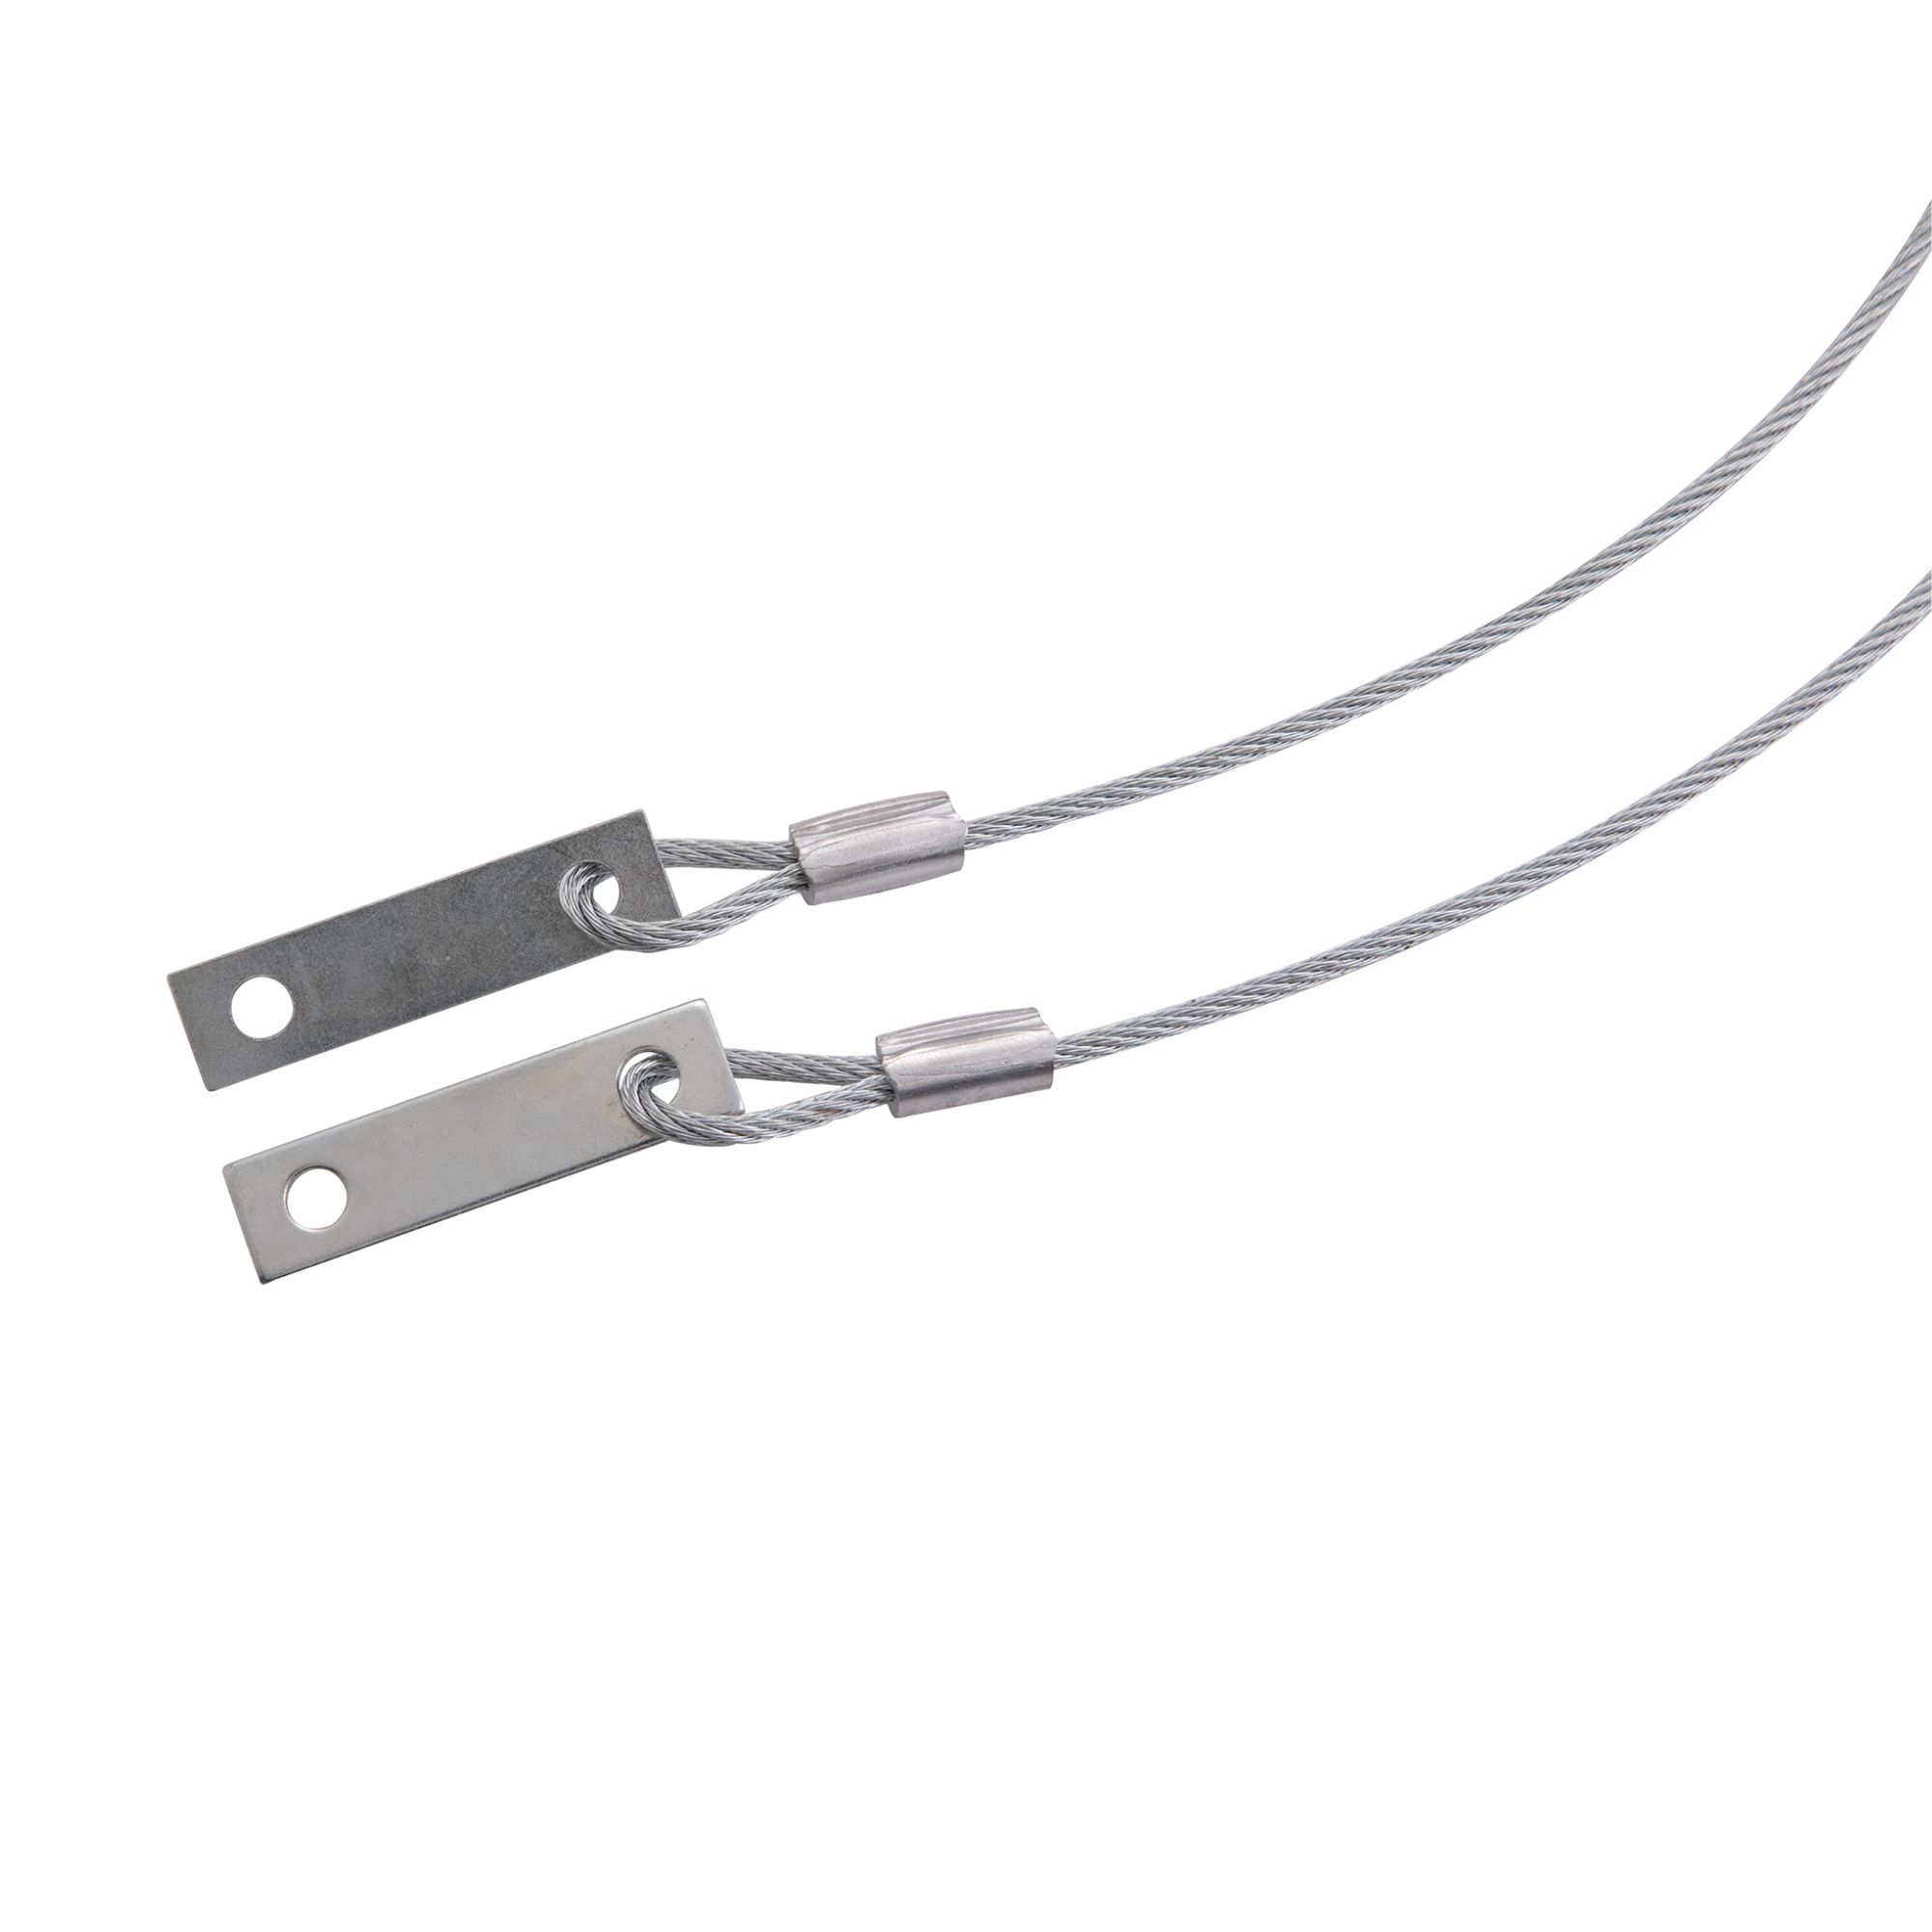 Garage Door Safety Cables (2-Pack)